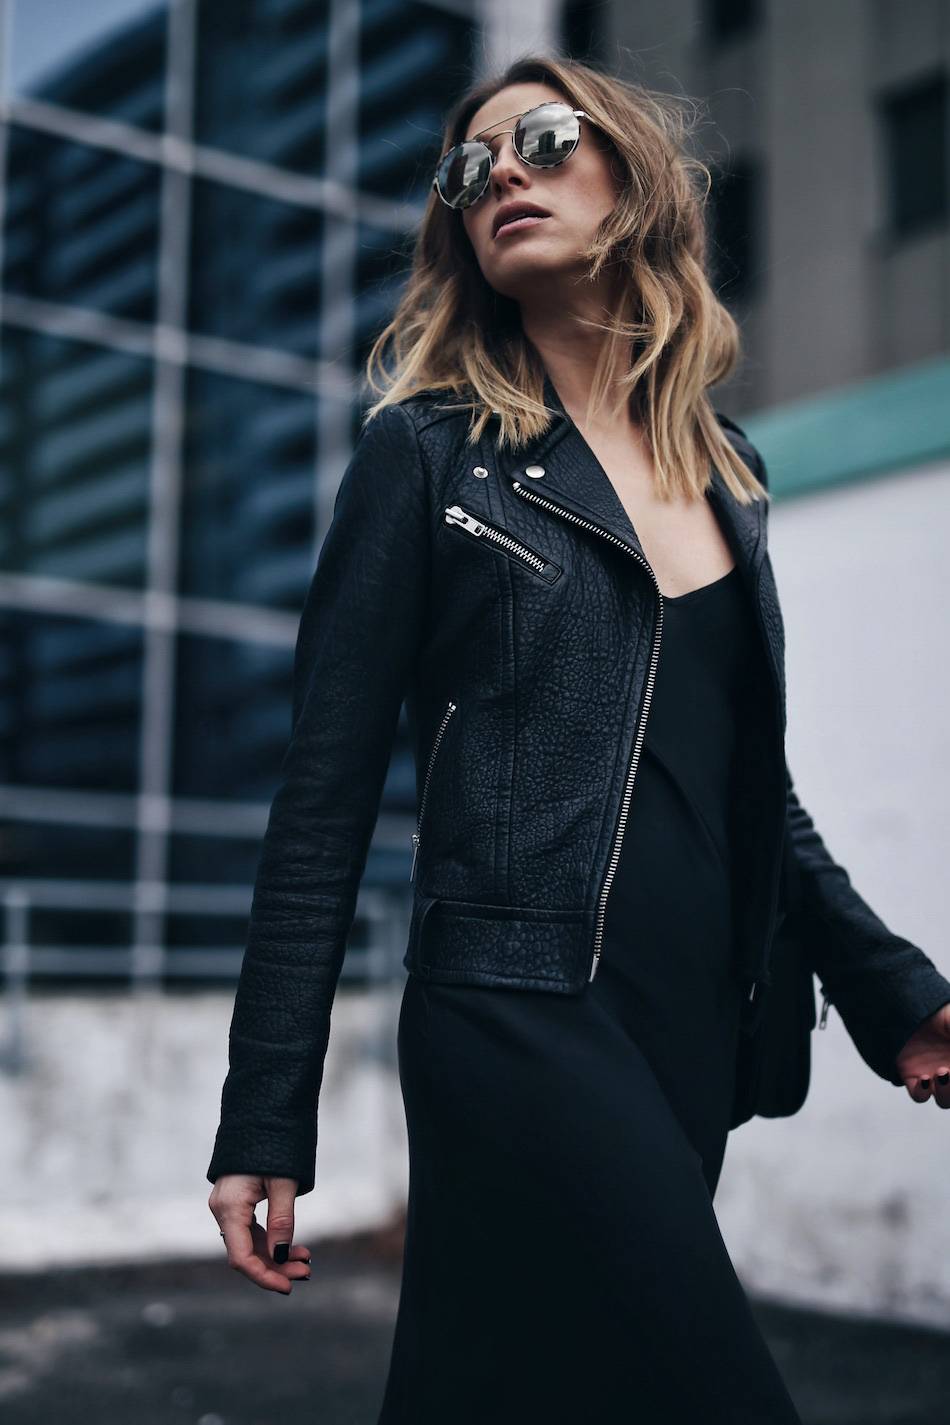 style-and-beauty-blogger-jill-lansky-of-the-august-diaries-in-a-mackage-rumer-leather-jacket-slip-dress-and-round-prada-sunglasses